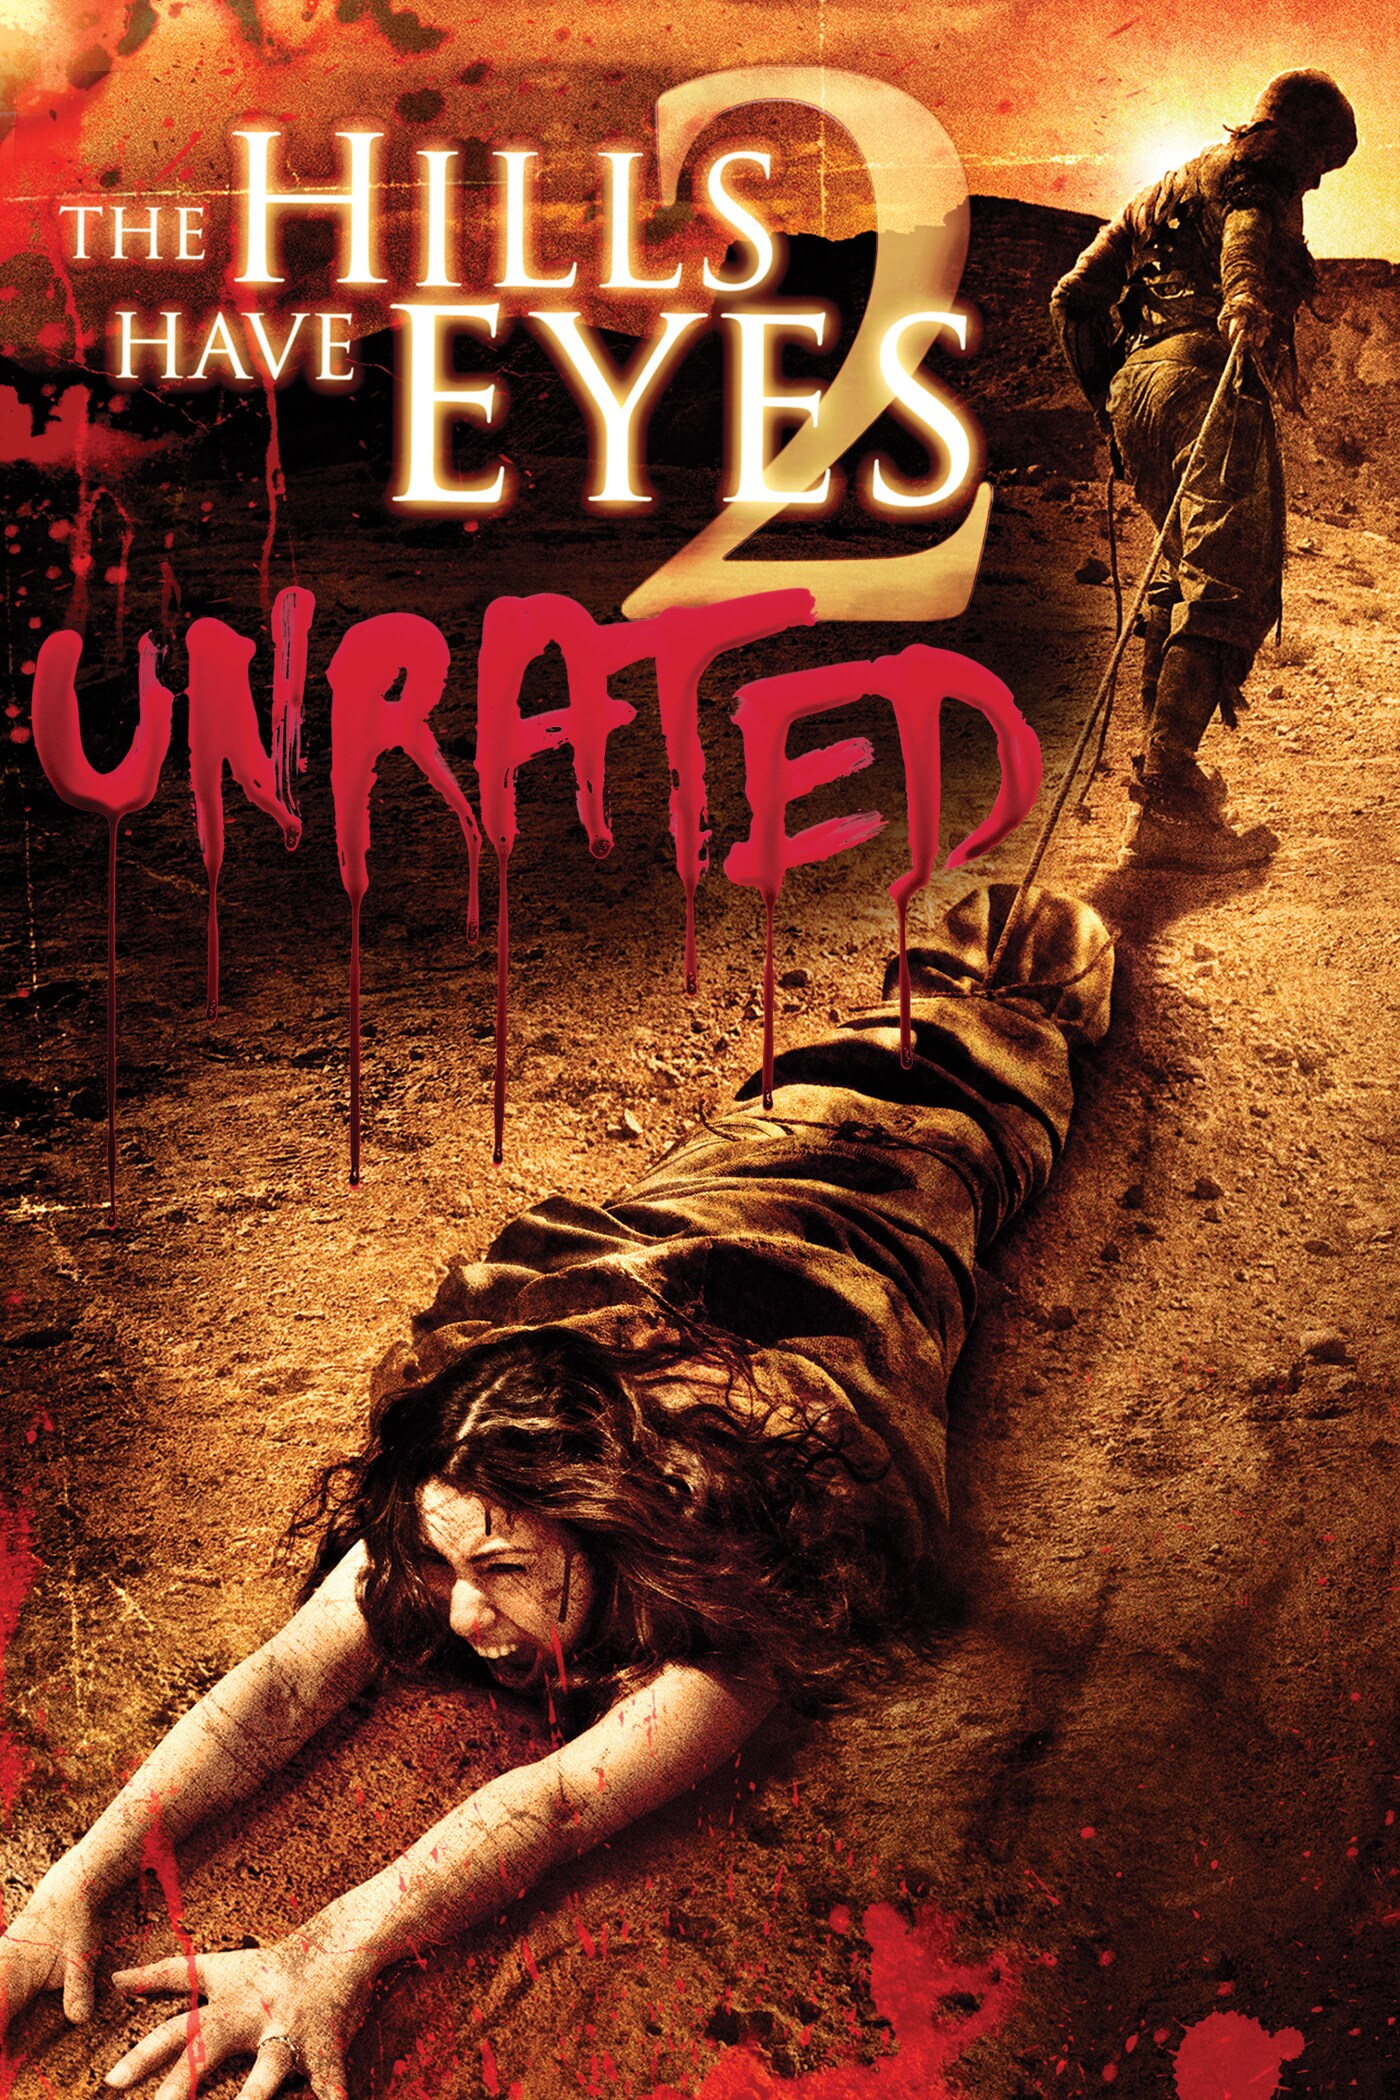 The Hills Have Eyes 2 Unrated movie poster